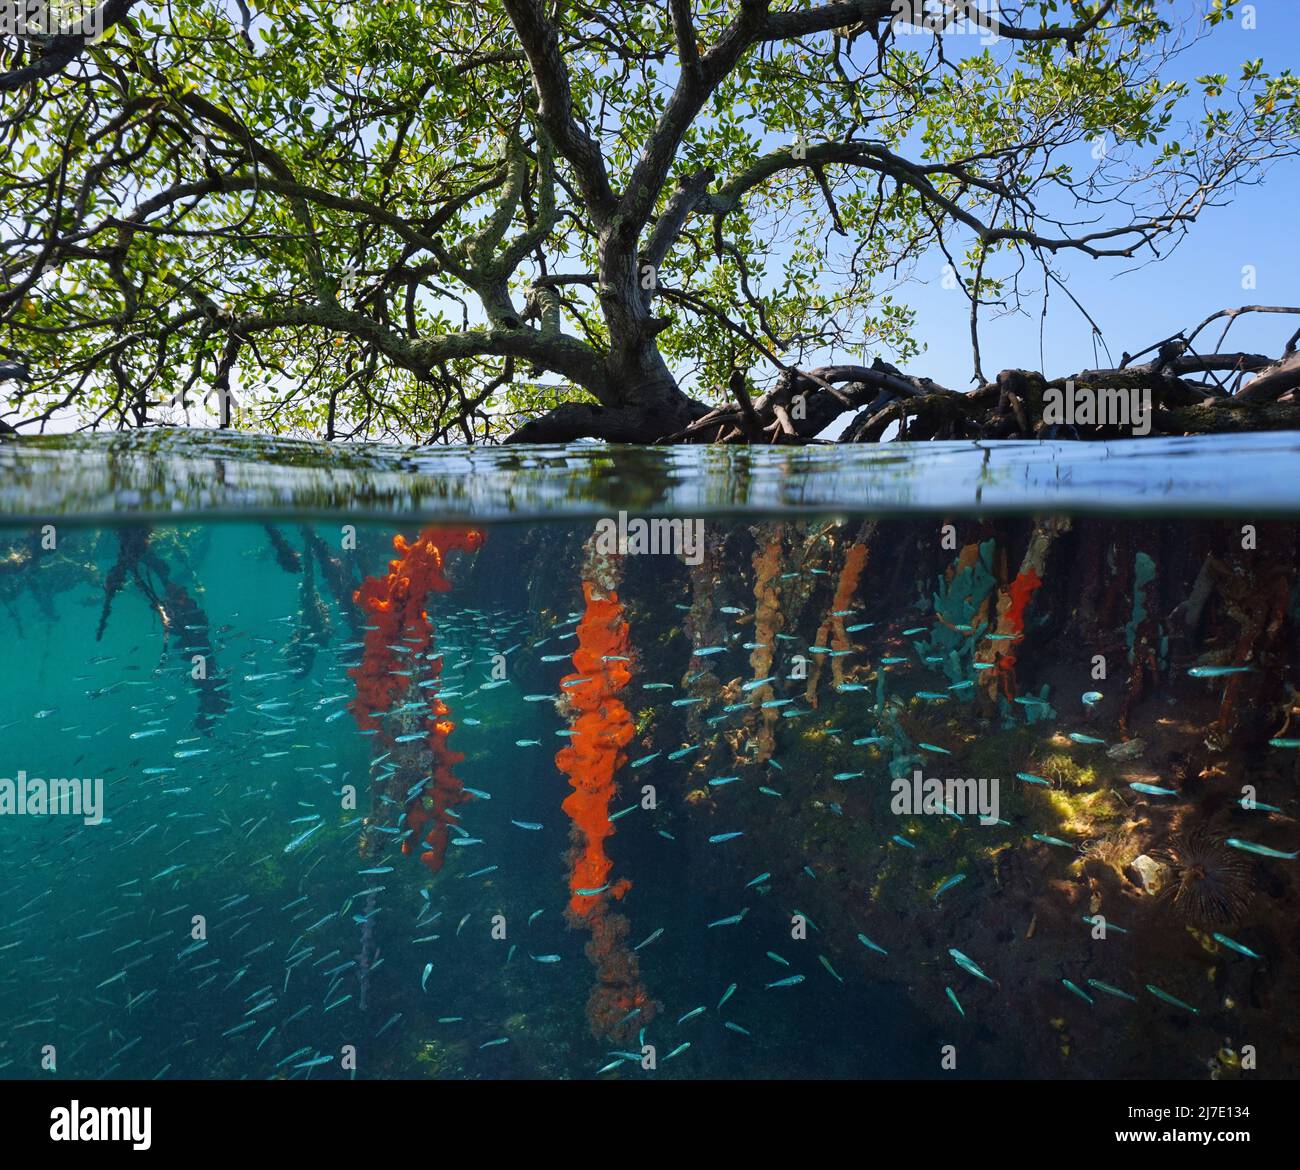 Mangrove tree in the sea with small fish and sponges on the roots underwater, split level view over and under water surface in the Caribbean Stock Photo